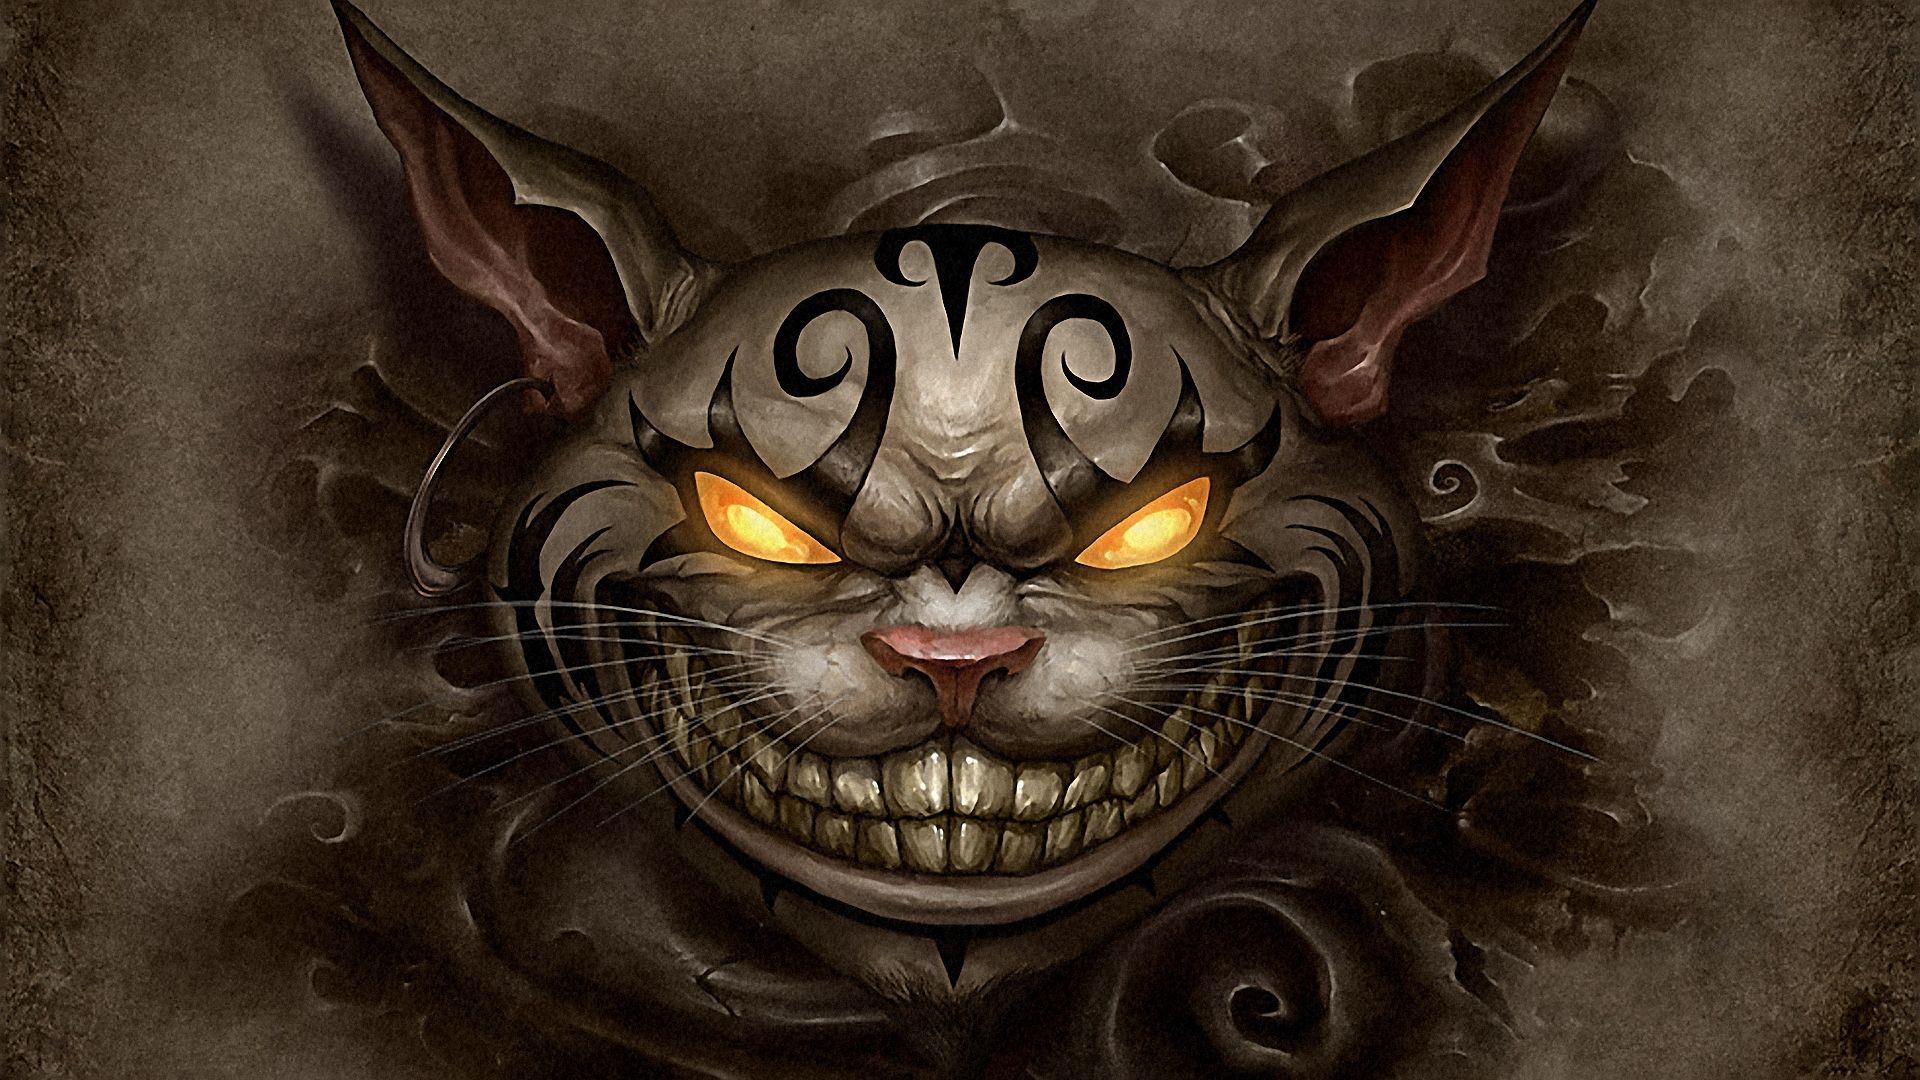 Download Wallpaper 1920x1080 Alice madness returns, Cheshire cat